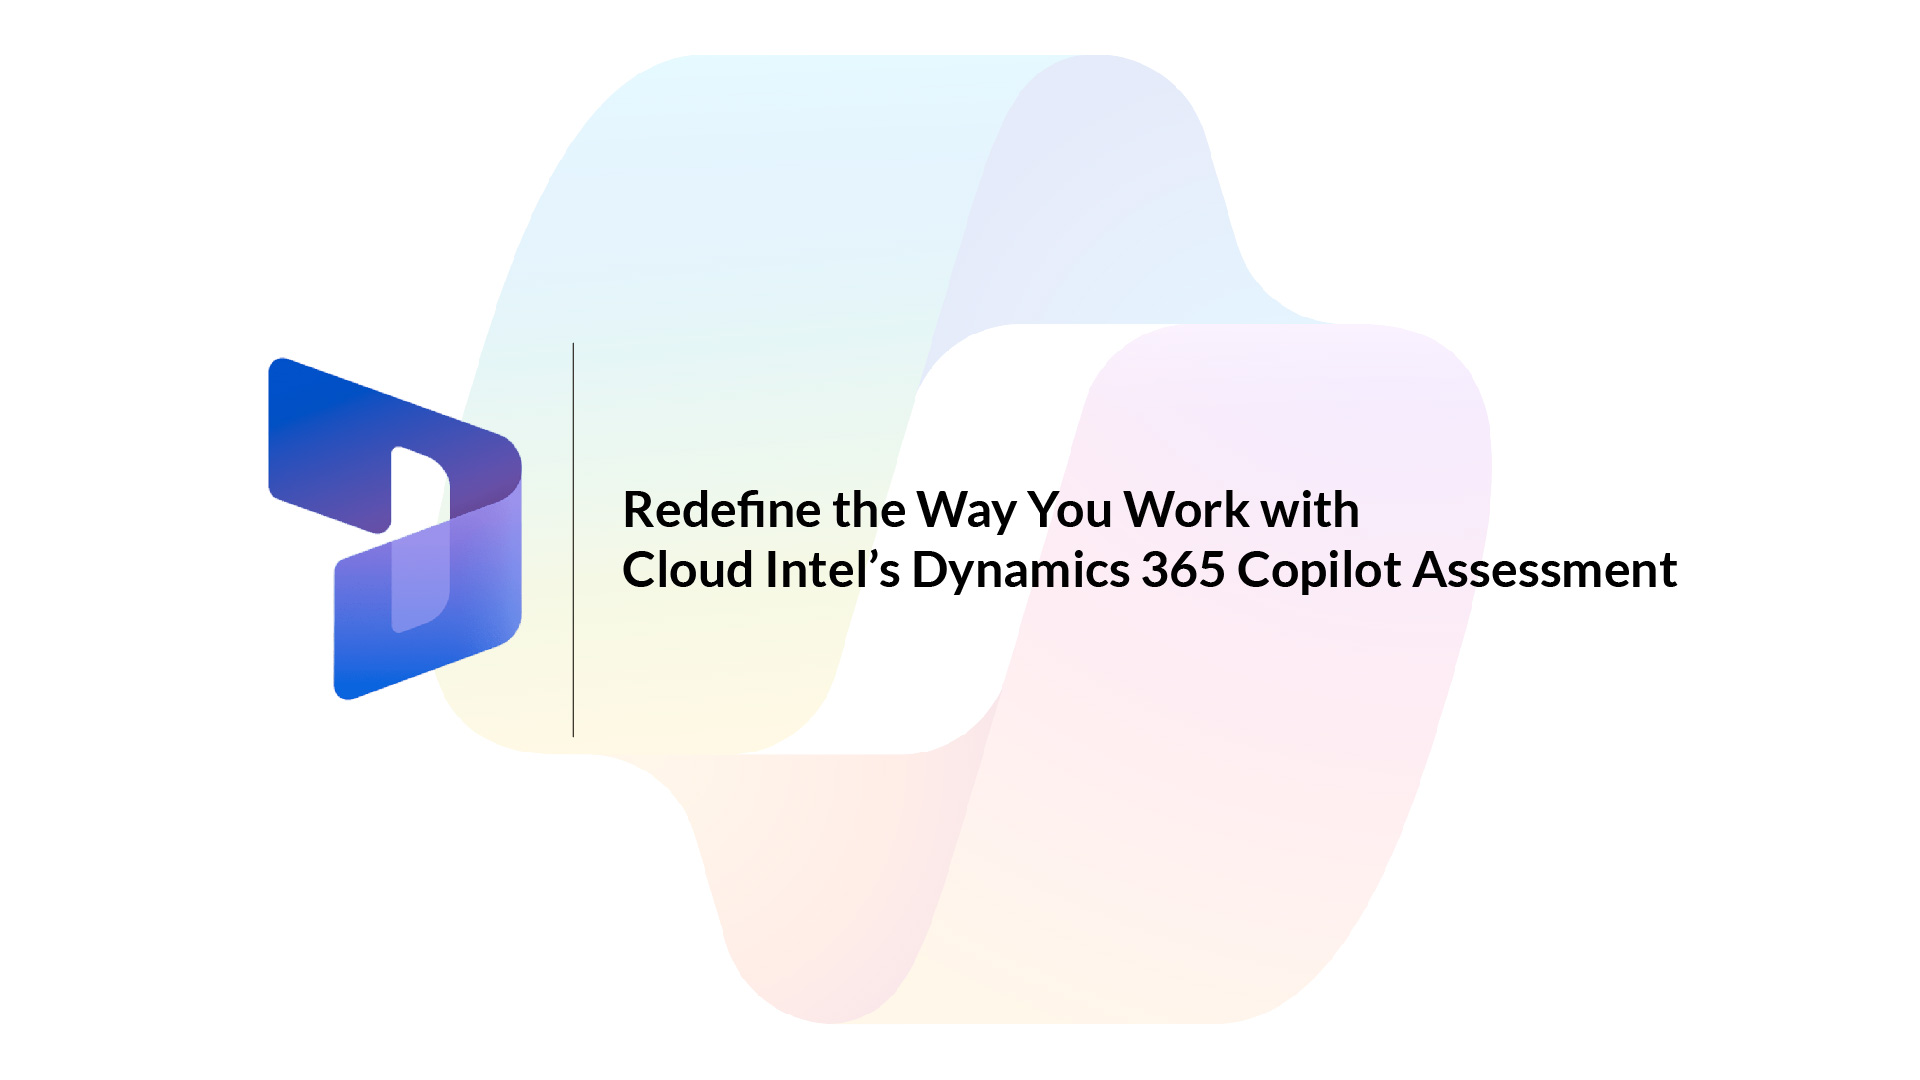 Click2cloud-Redefine the Way You Work with Cloud Intel’s Dynamics 365 Copilot Assessment_Video